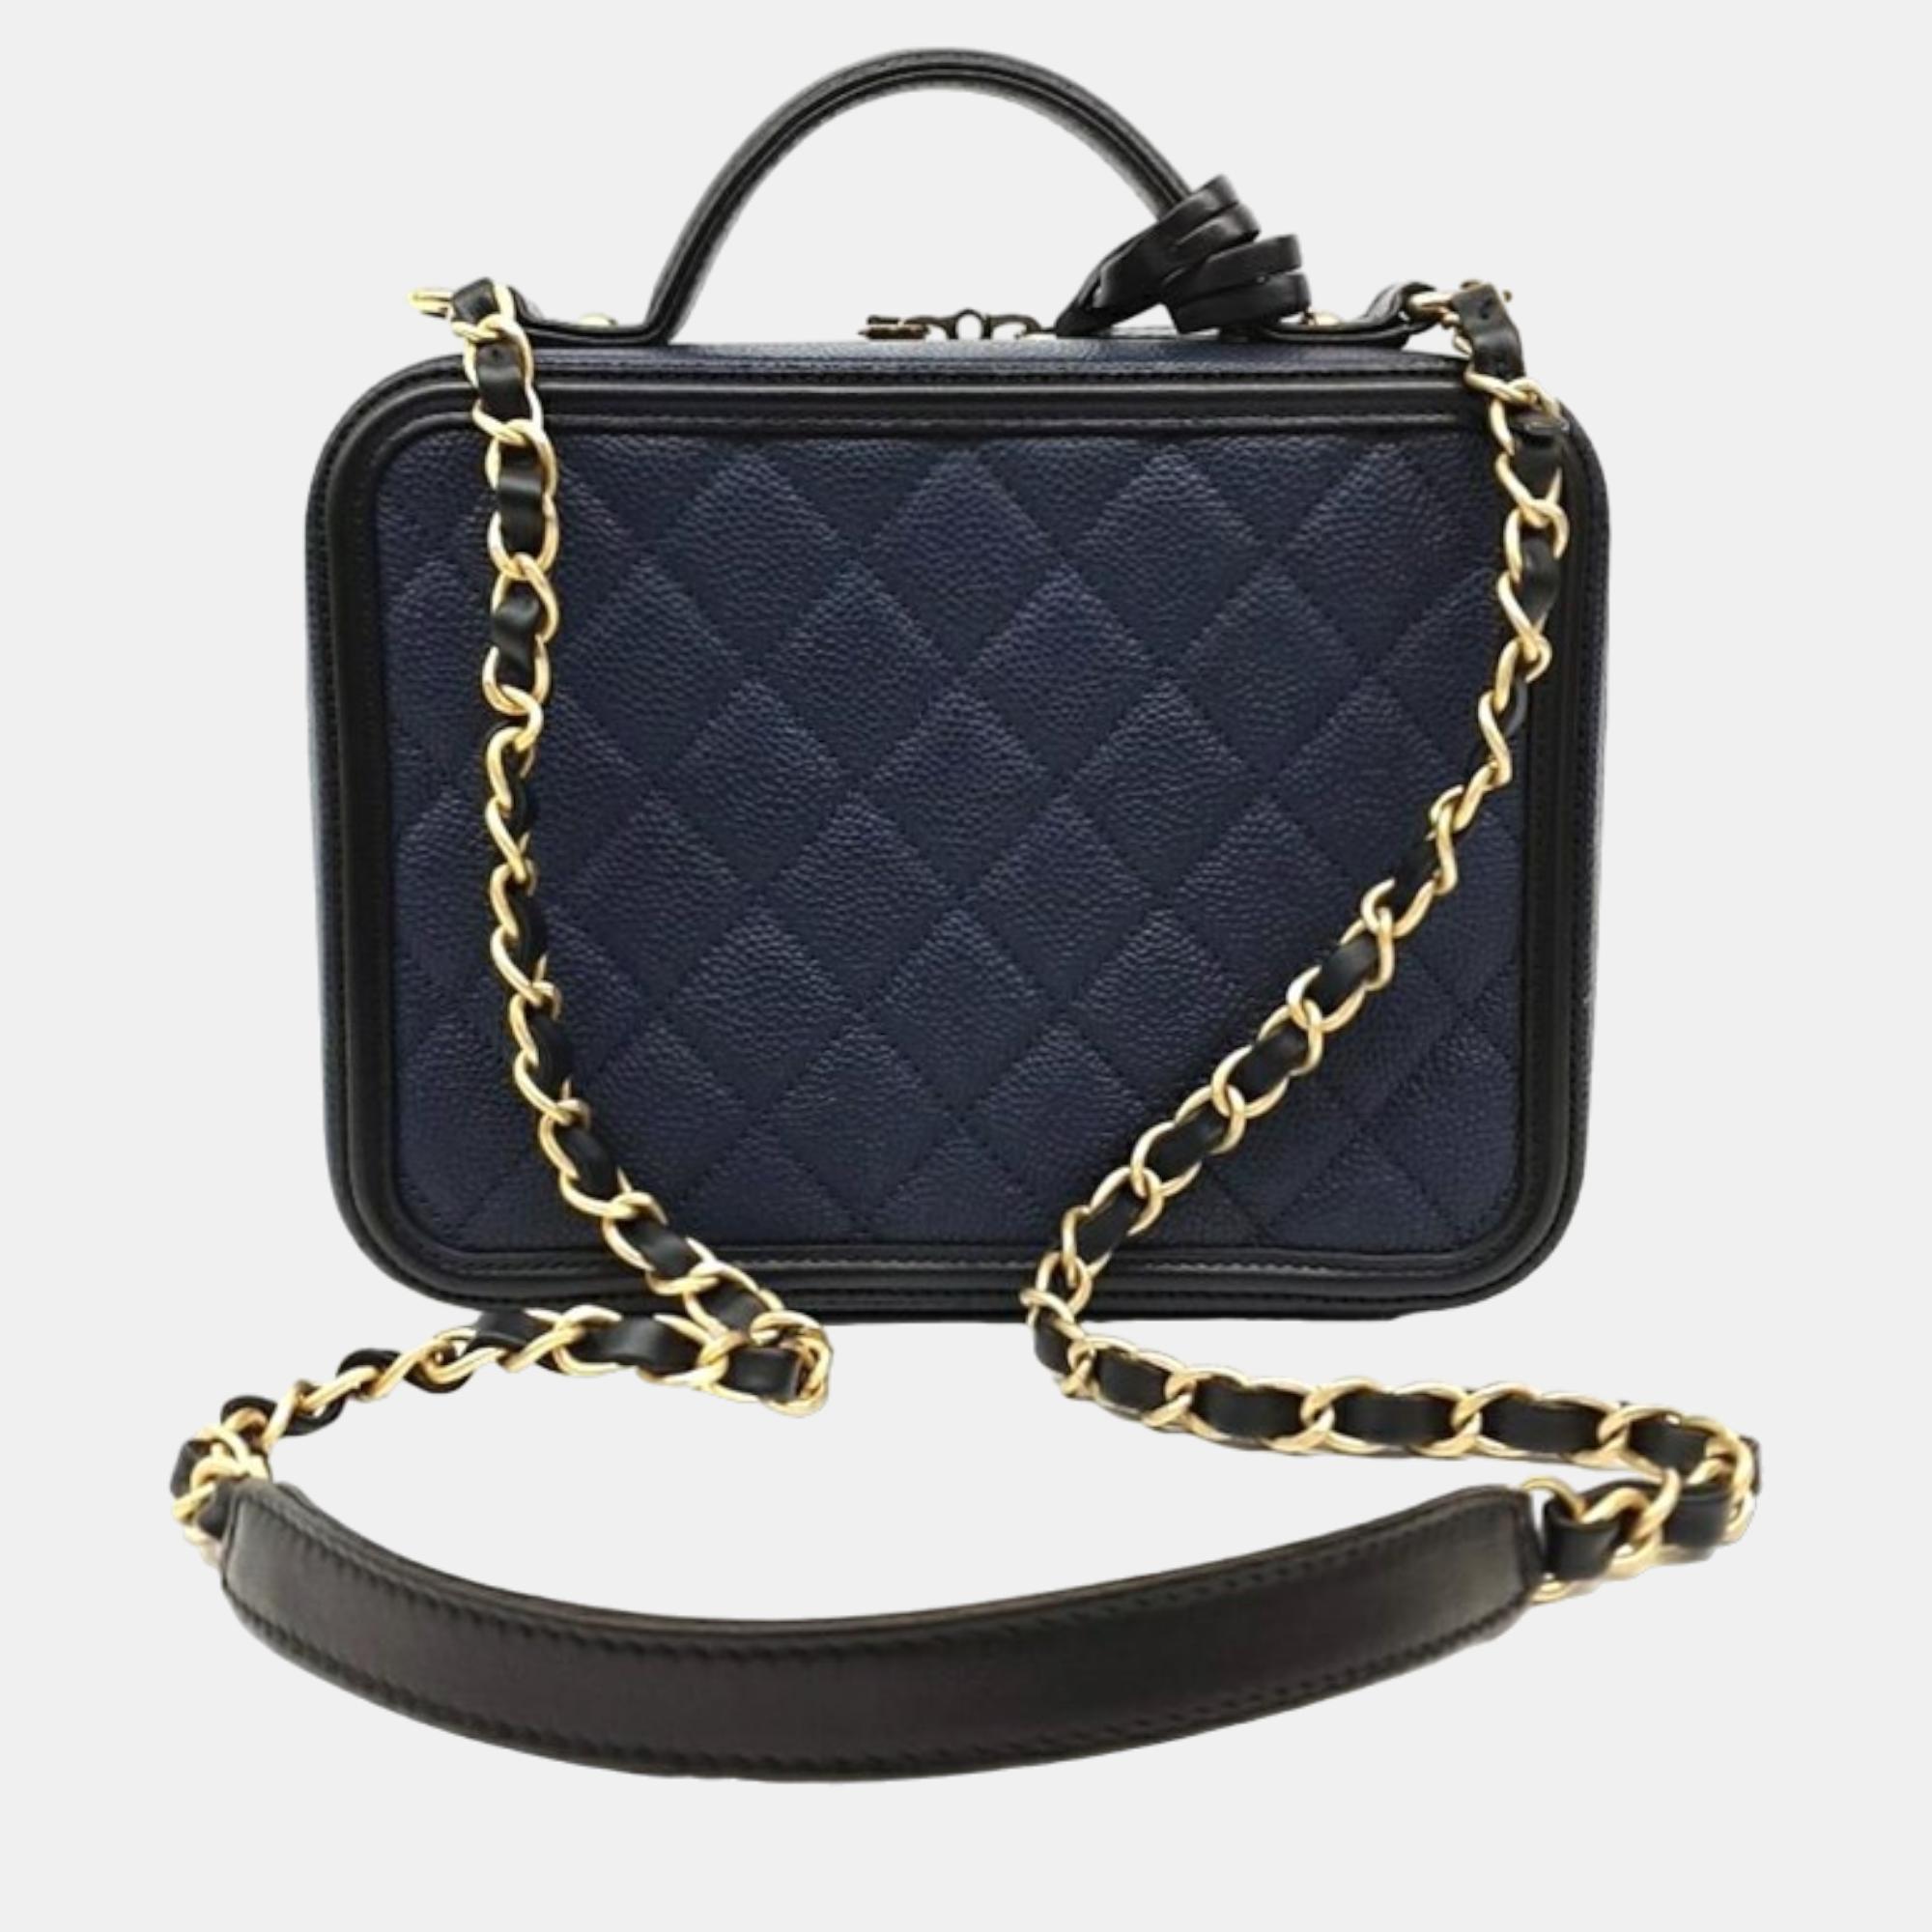 Chanel Blue Leather Small Filigree Vanity Case